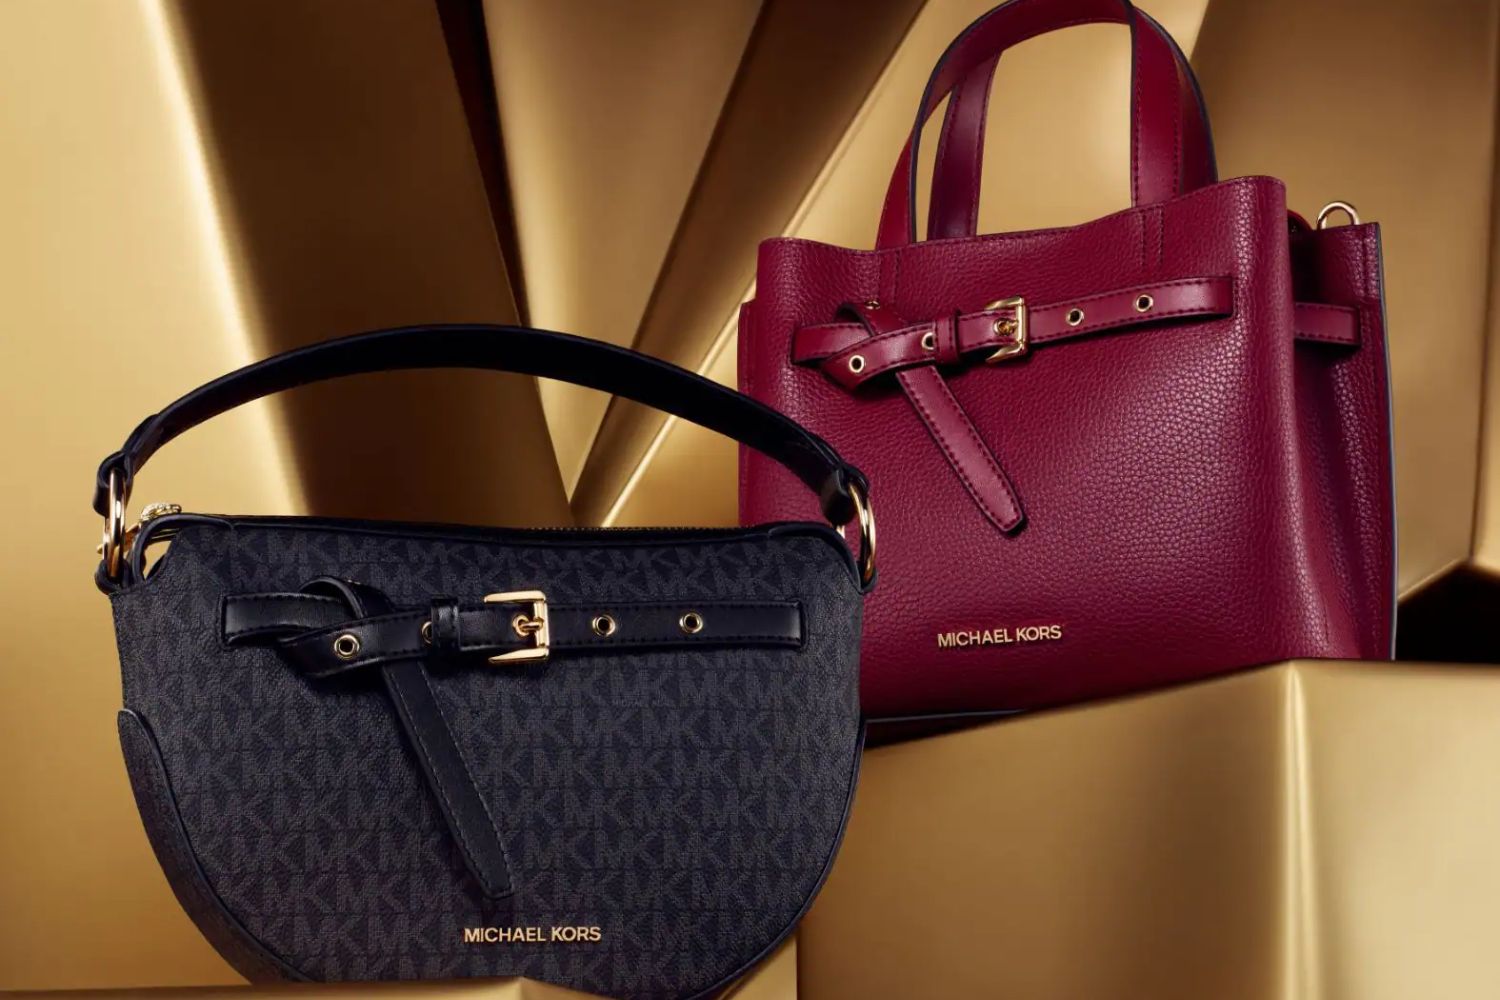 Michael Kors, Early Black Friday Deals of 2022